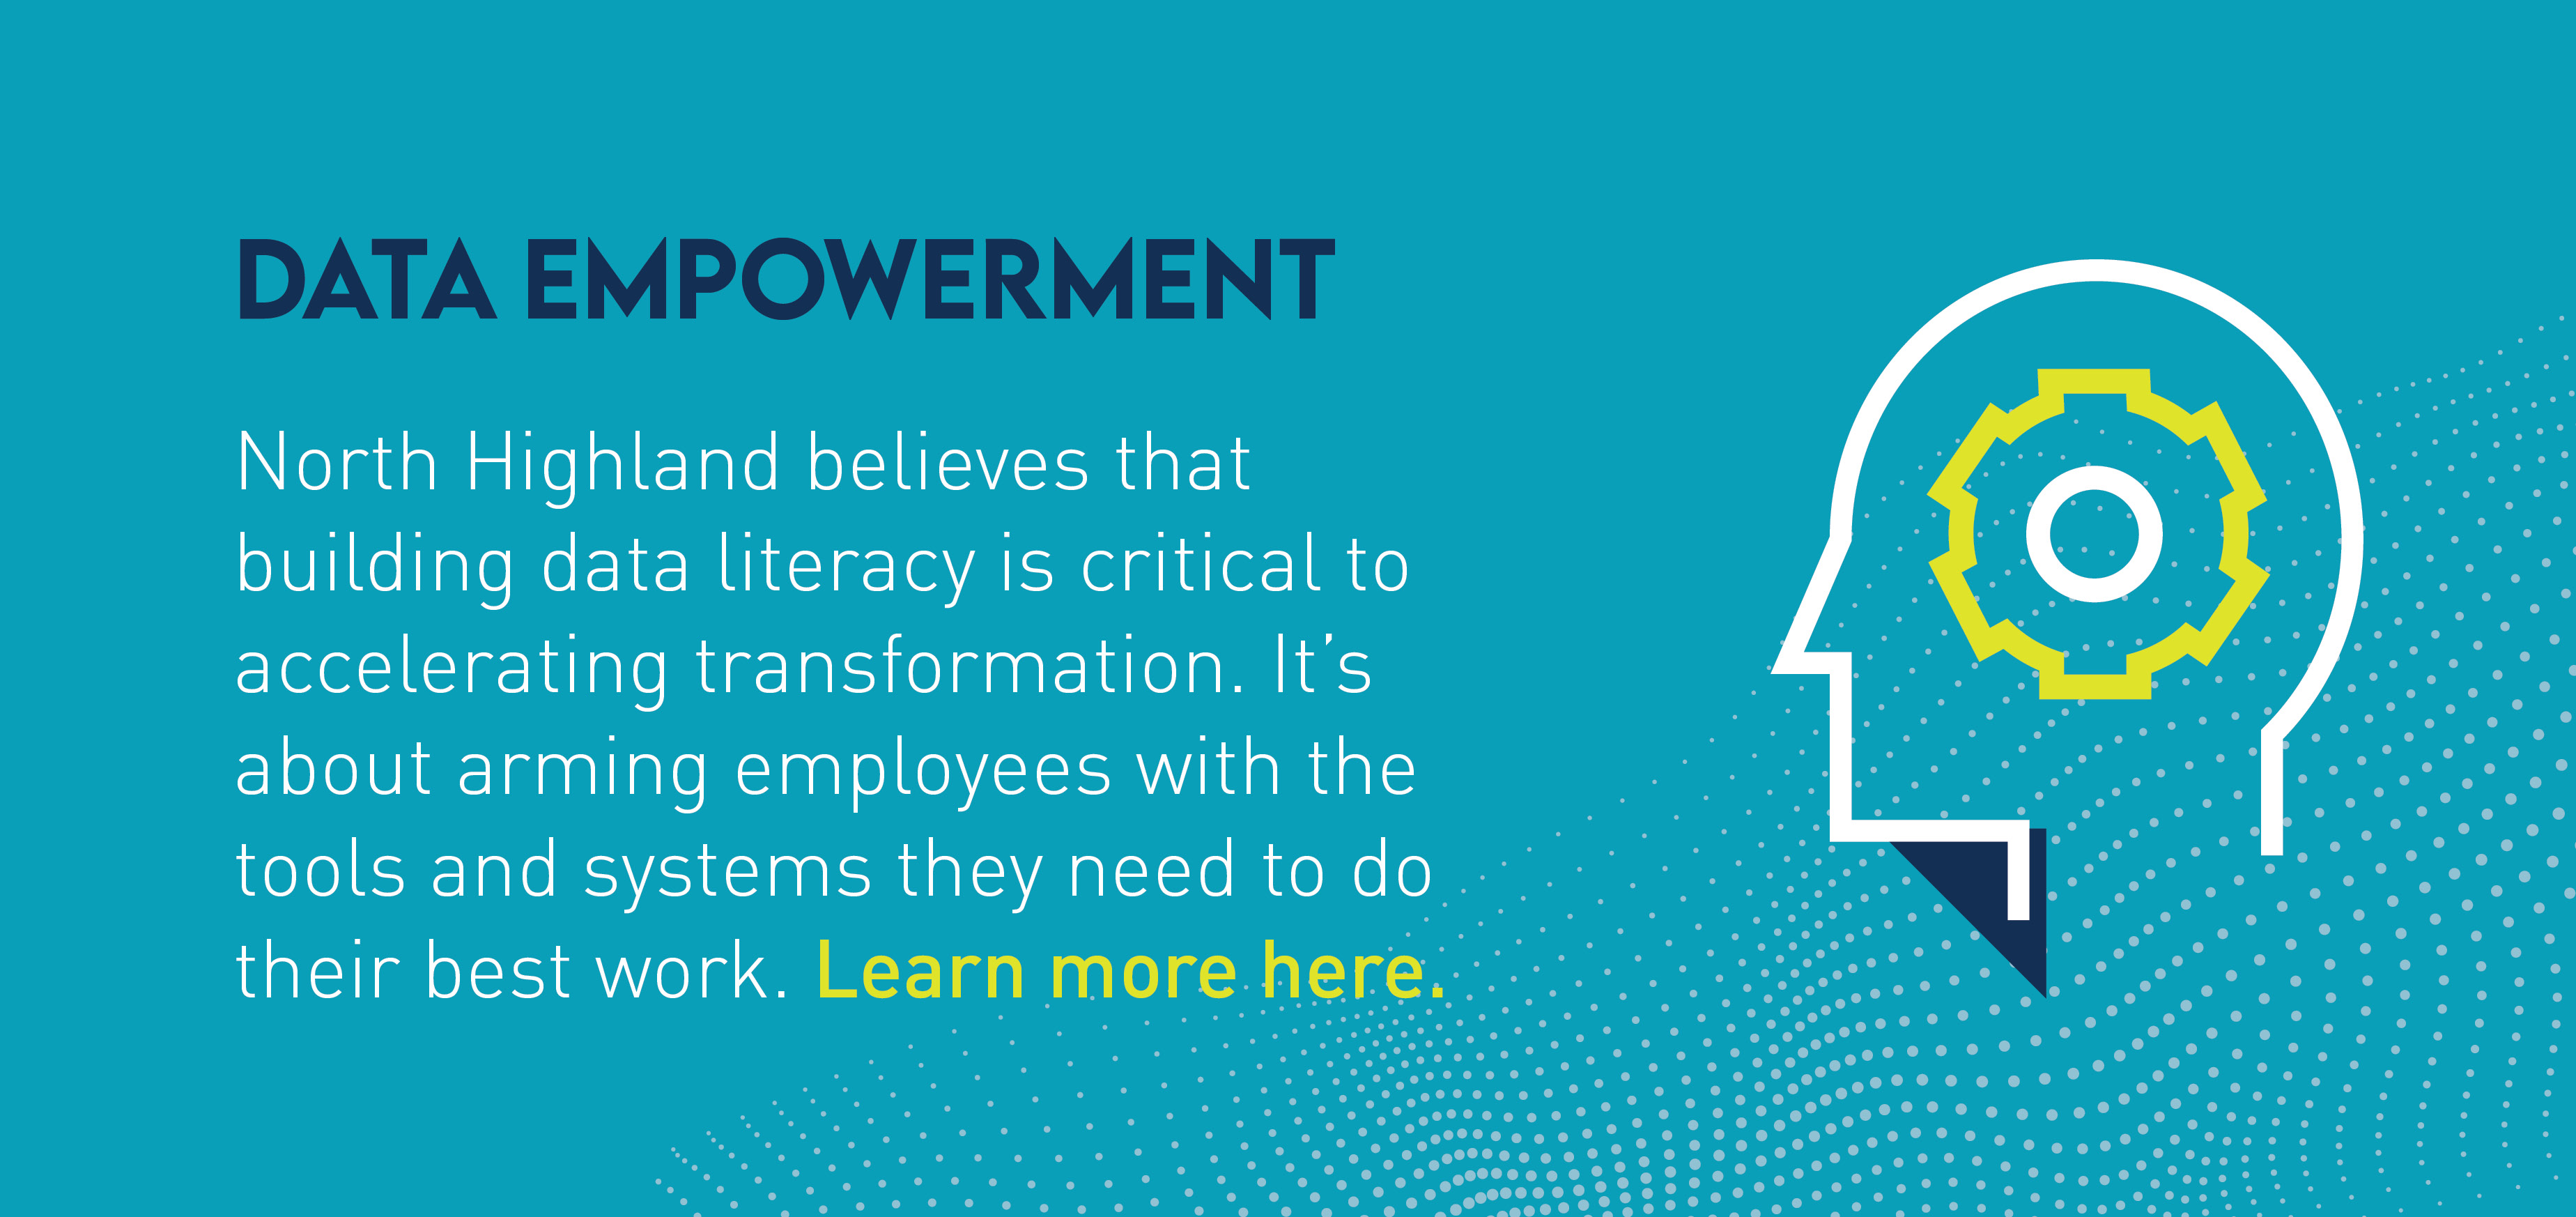 Graphic with text that says: "Data empowerment: North Highland believes that building data literacy is critical to accelerating transformation. It's about arming employees with  the tools and systems they need to do their best work. Learn more here."